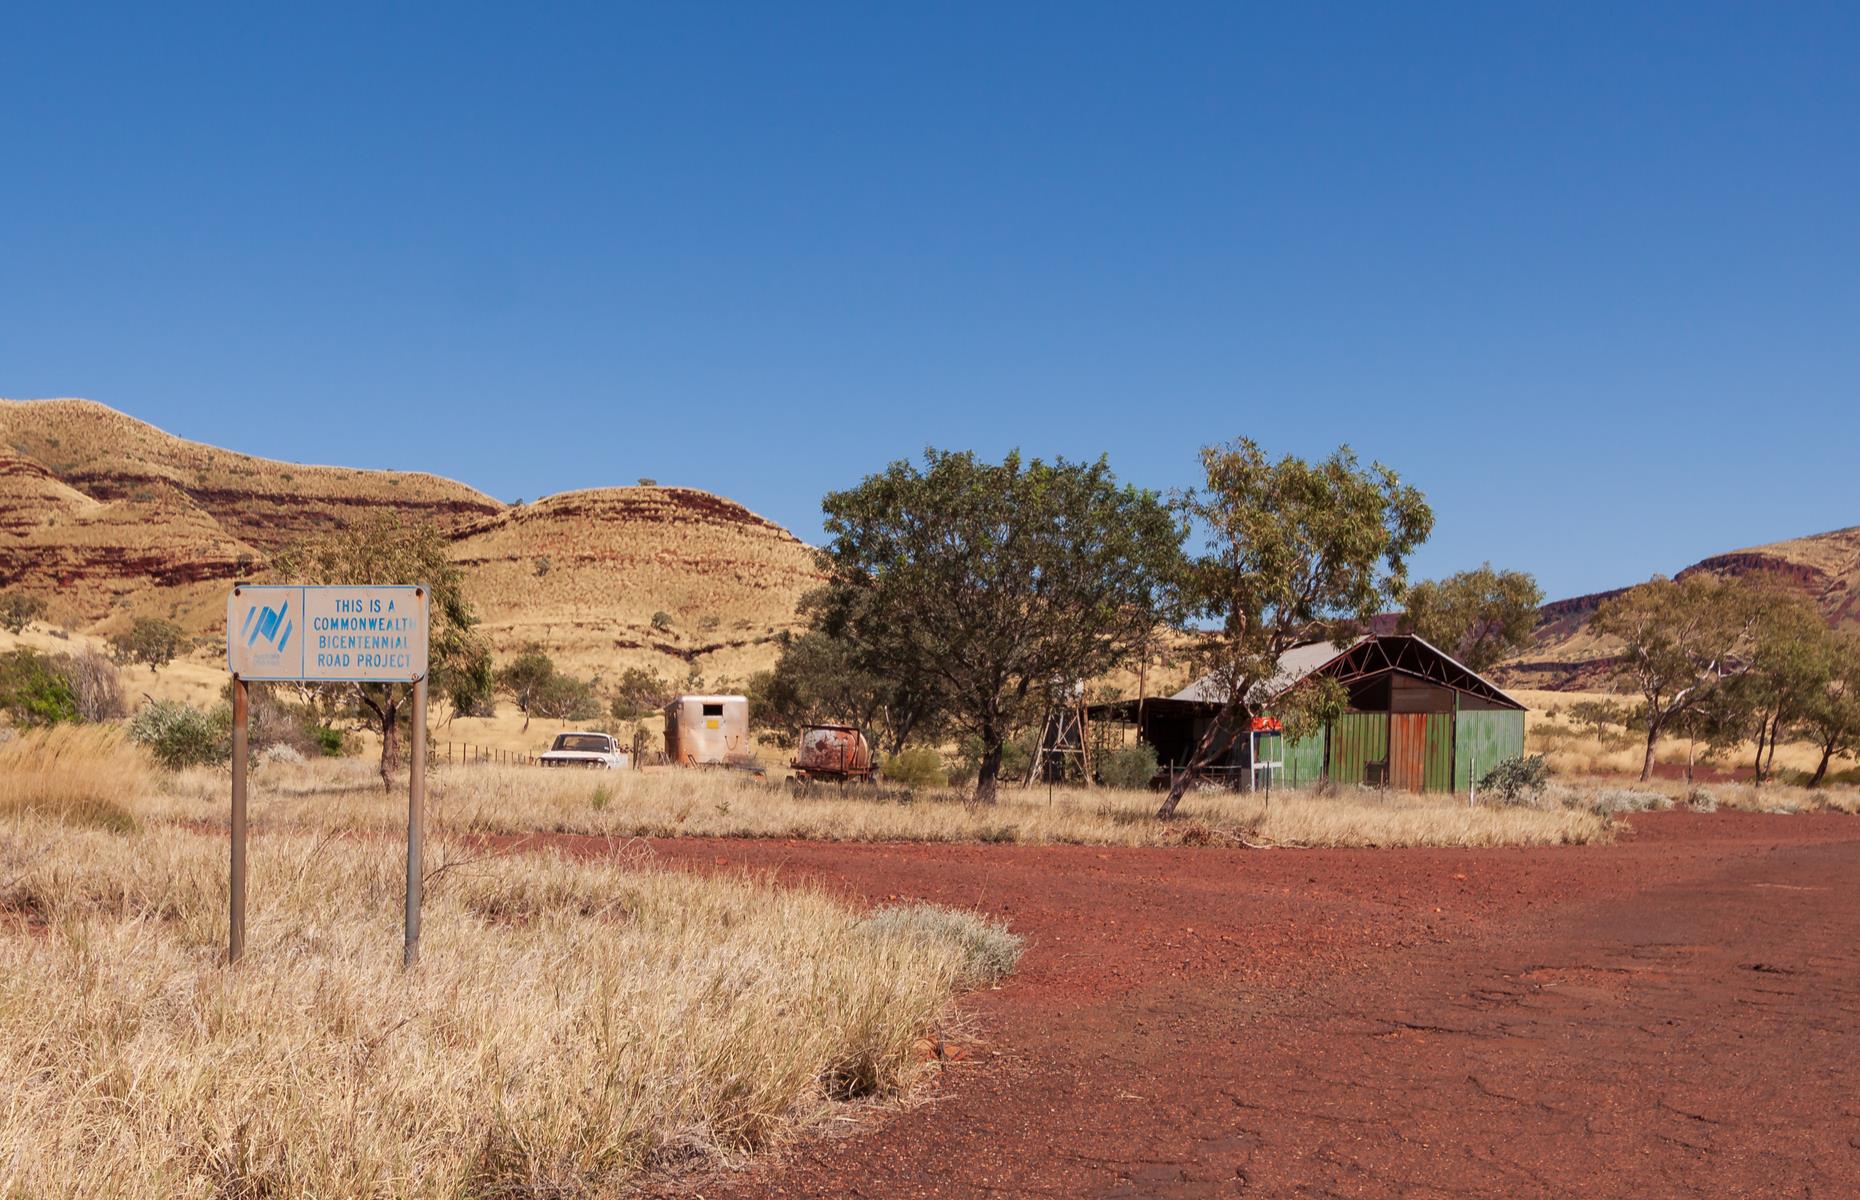 <p>This next abandoned outpost has been described as one of the most dangerous and contaminated places on the planet. Once located in the dry, dusty climes of Pilbara, the unassuming small town of Wittenoom belied a toxic surprise hiding underground...</p>